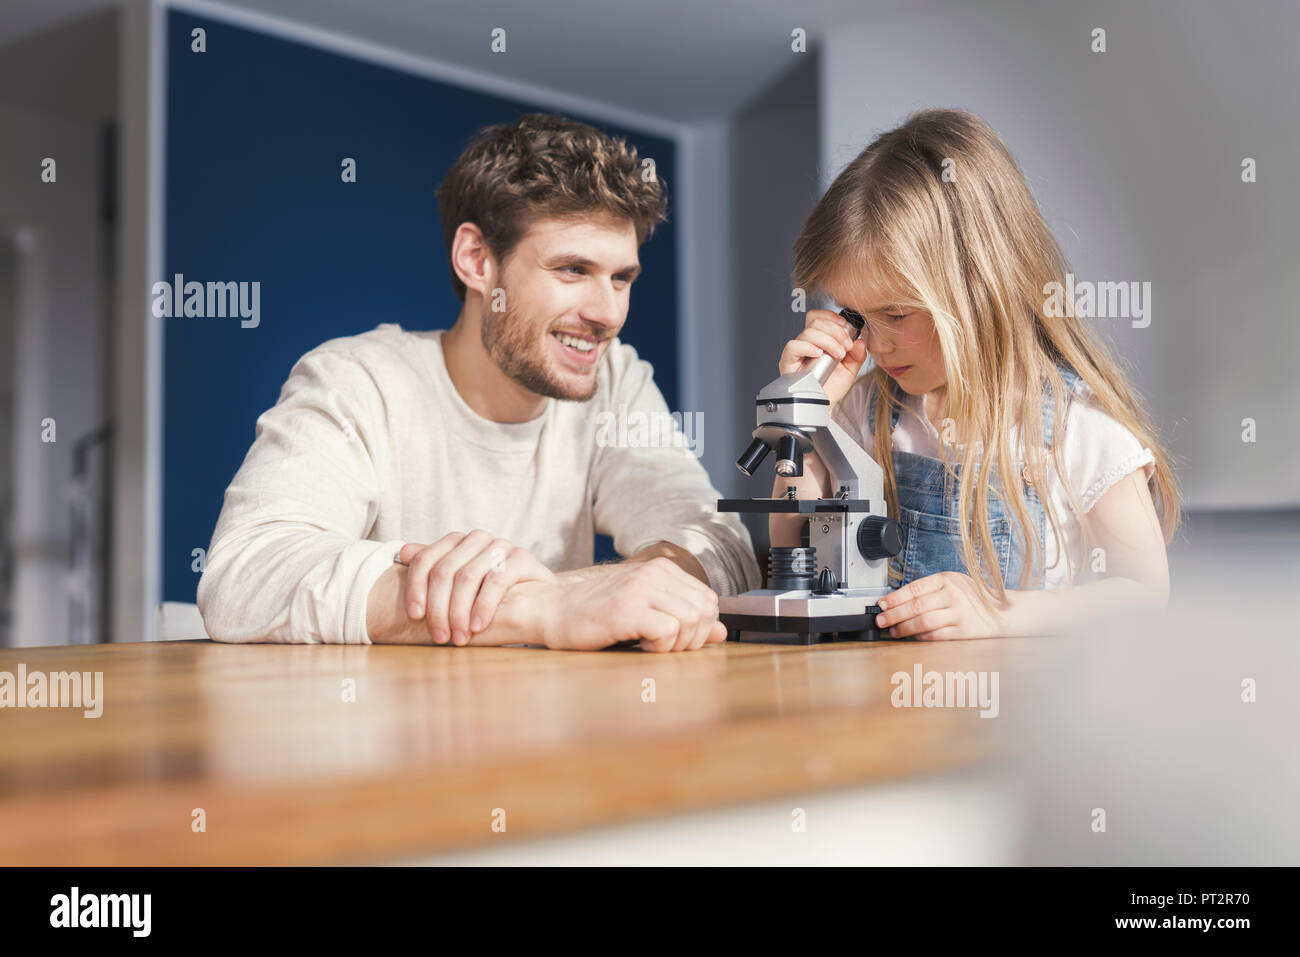 Father watching daughter use a microscope, smiling proudly Stock Photo